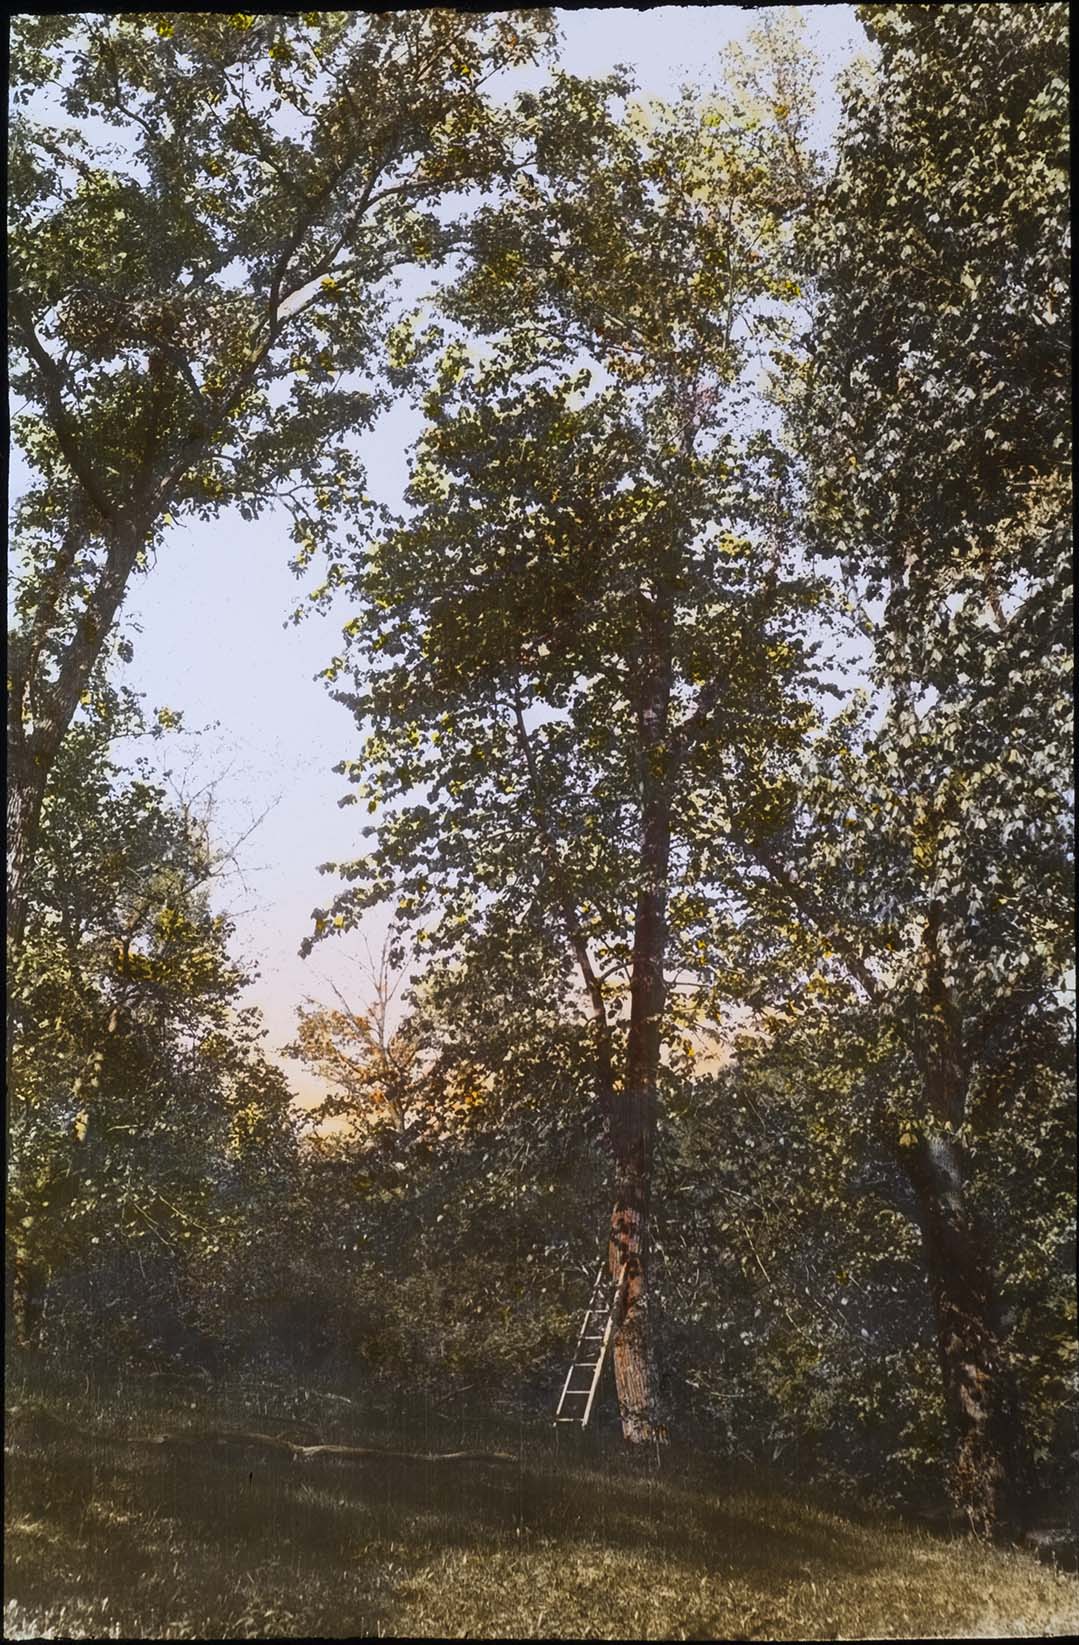 Lantern slide and photograph of a large basswood tree with Red-tailed Hawk nest